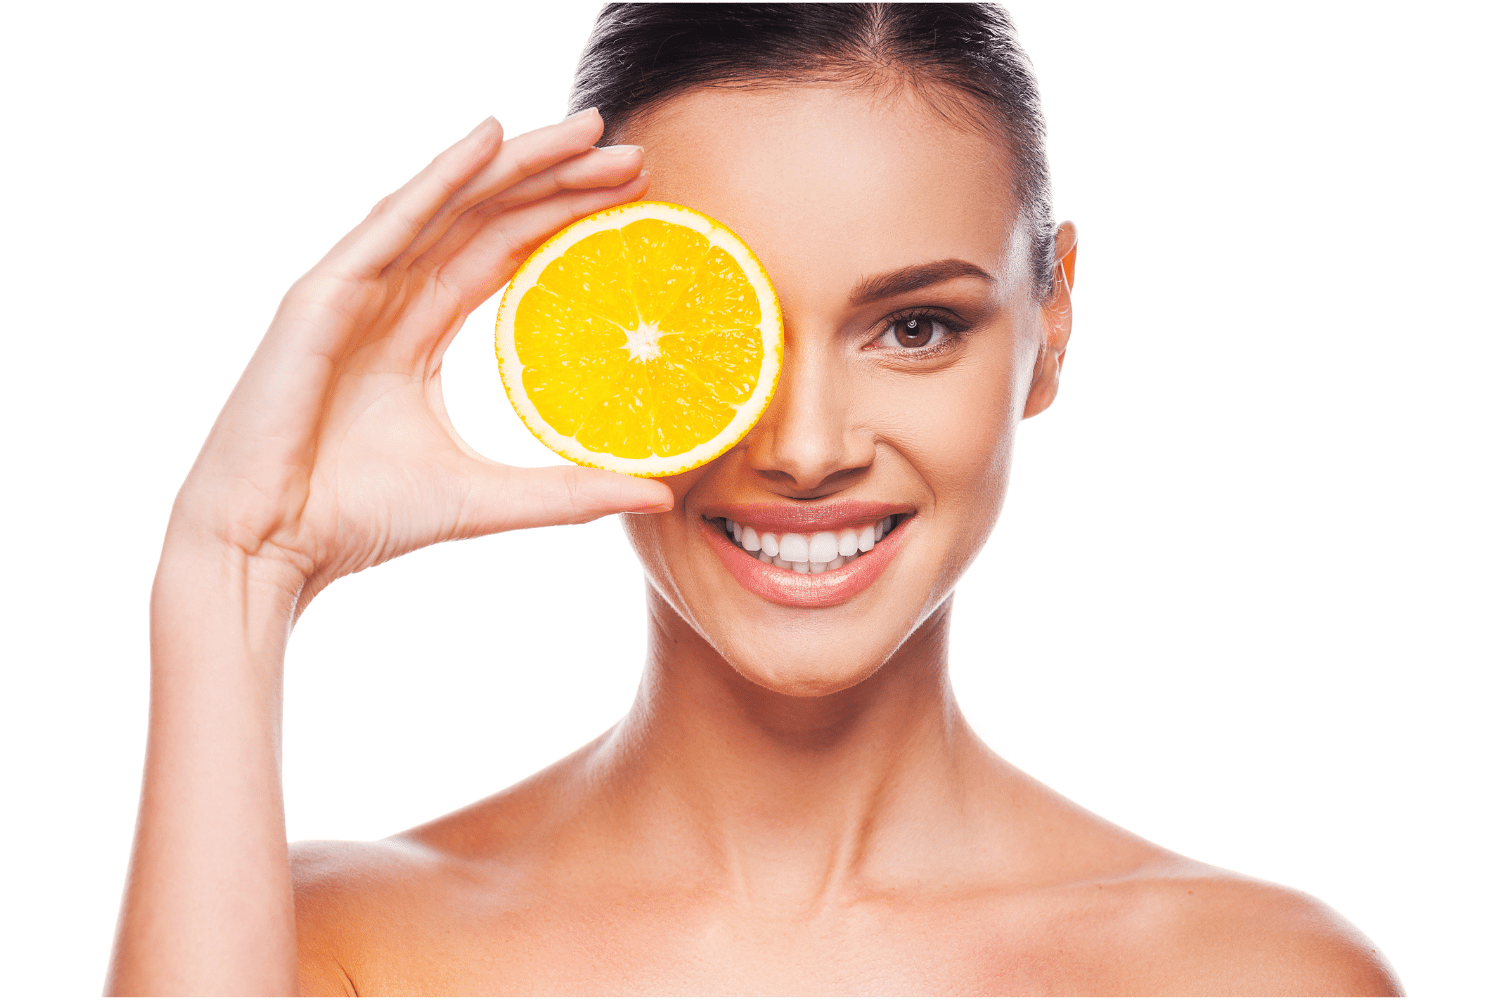 The 7 Best Liposomal Vitamin C We Found on Amazon - You Will Be Amazed by the Most Popular Ones!